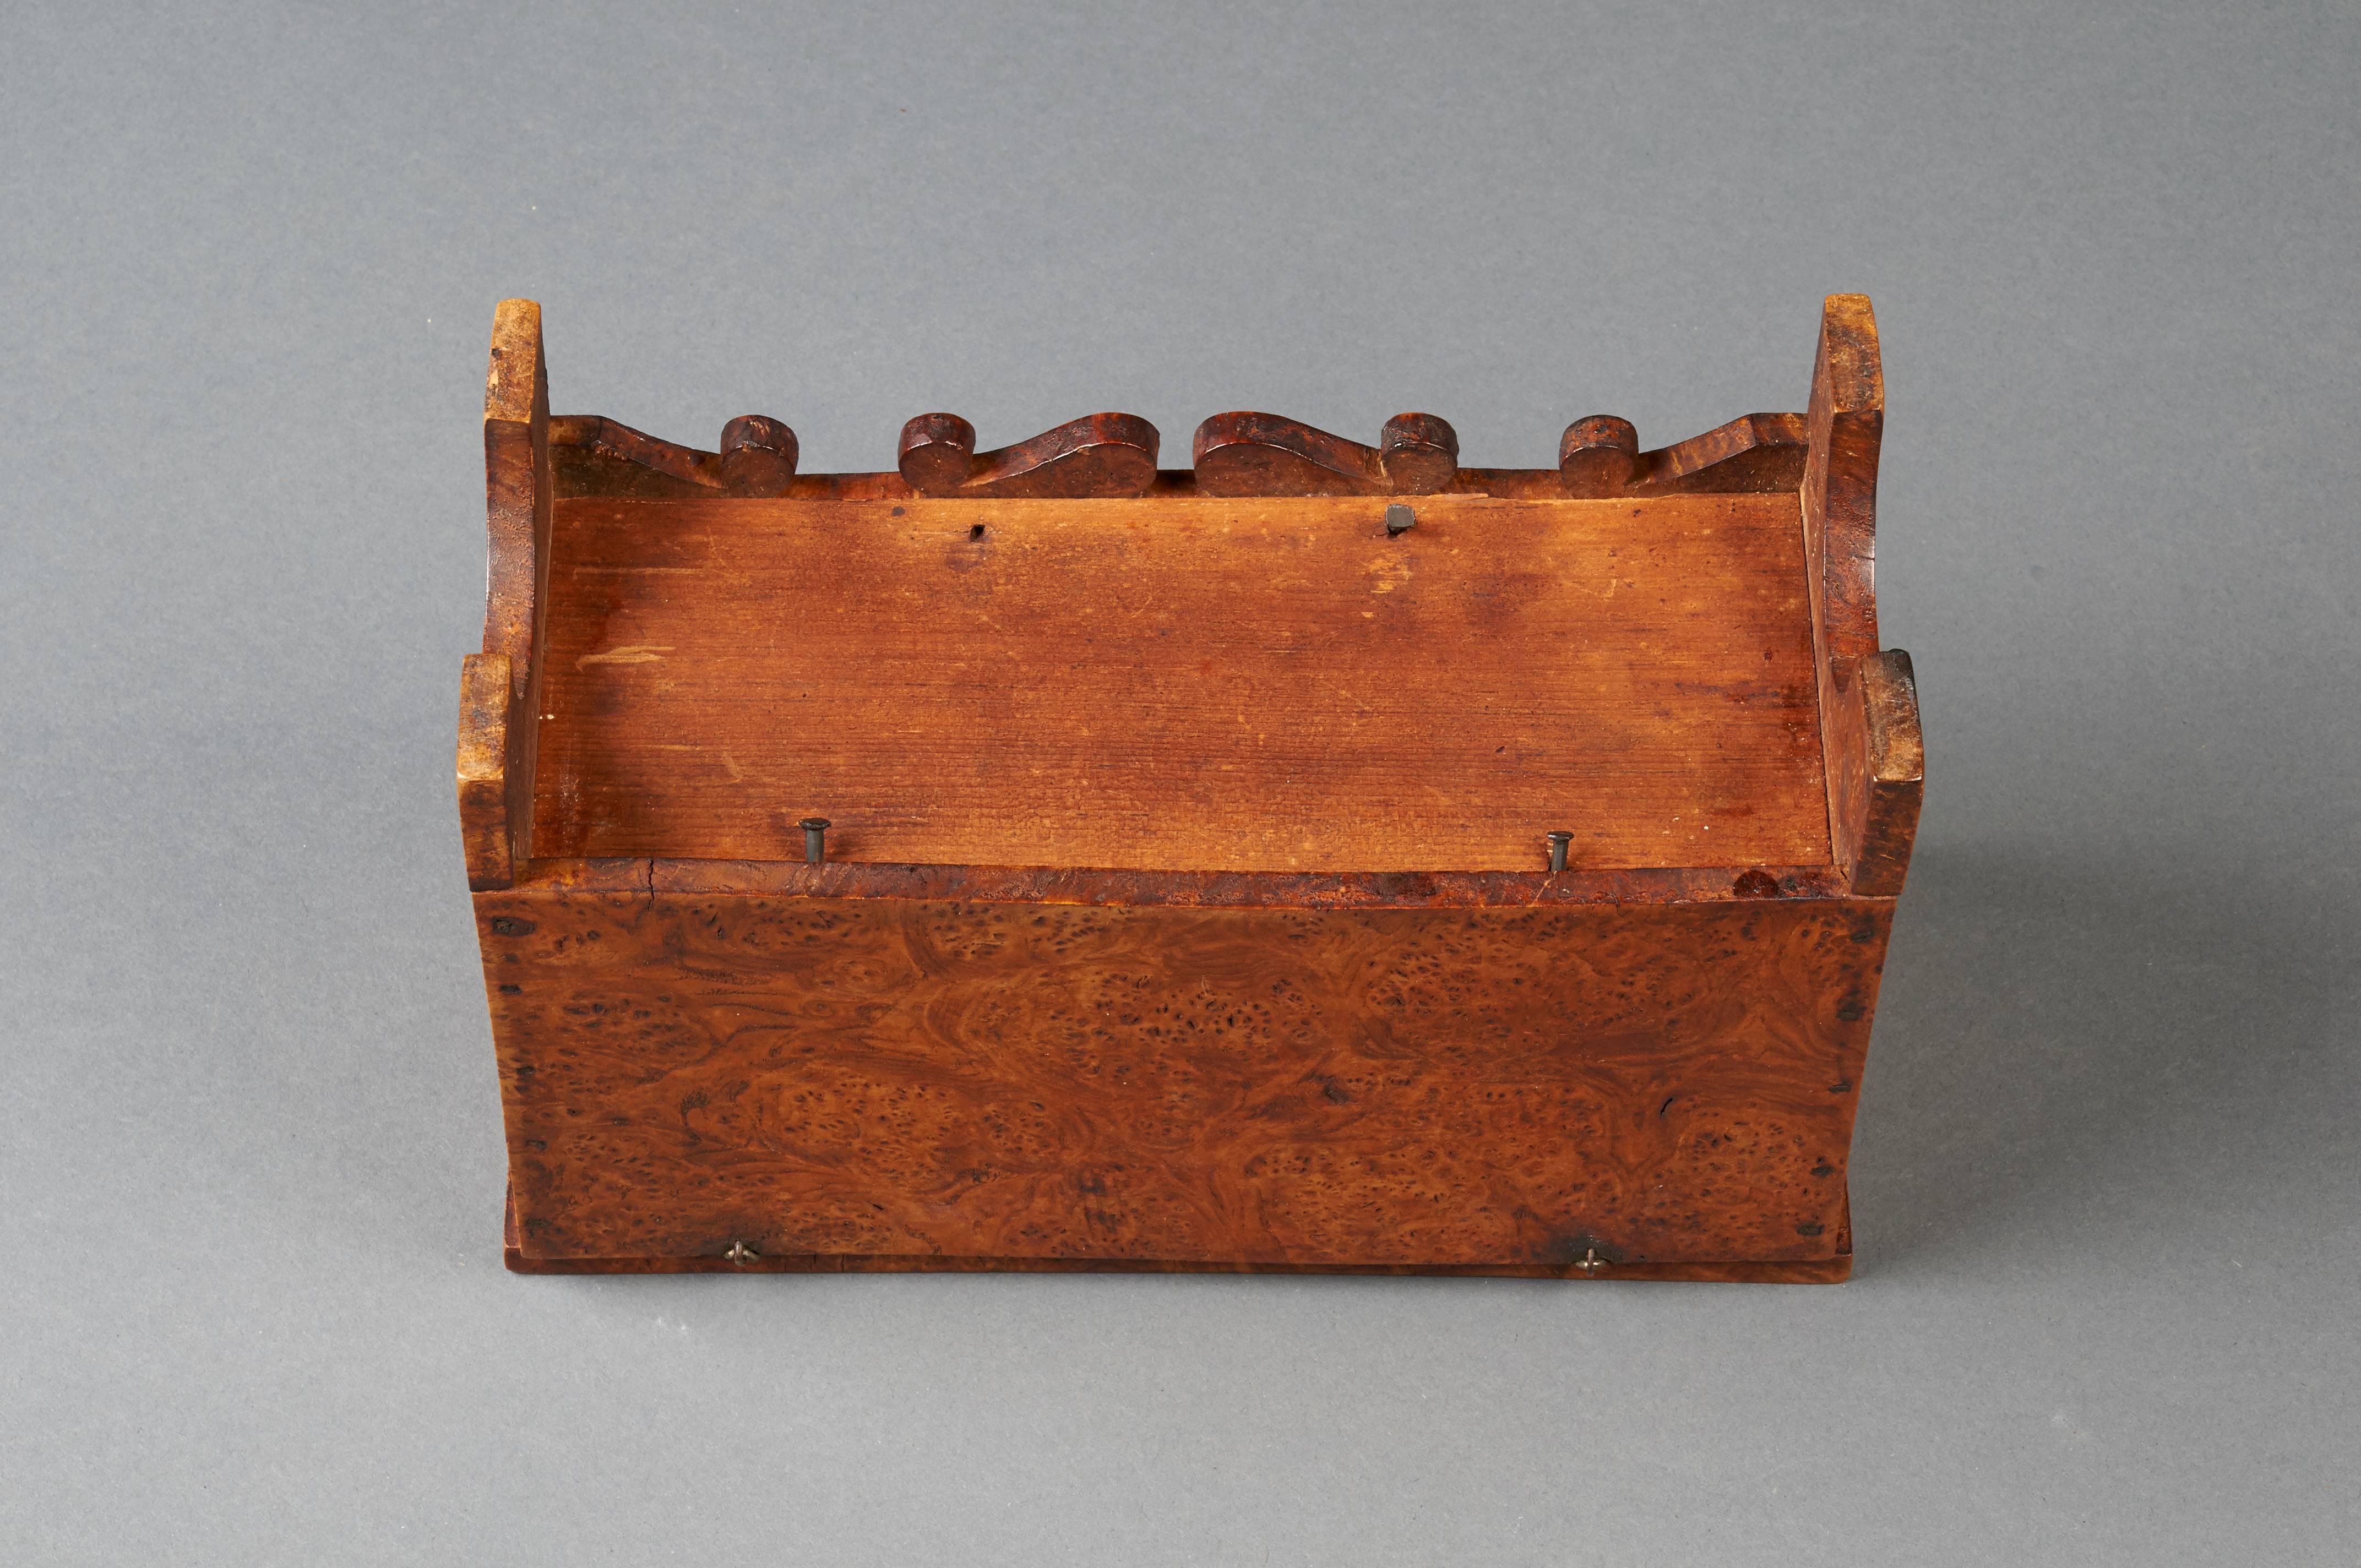 A miniature blanket chest of outstanding figured burl maple from New York. The shaped skirt and small size make this a wonderful item for table-top display. Early circa 1800 manufacture. Original condition.